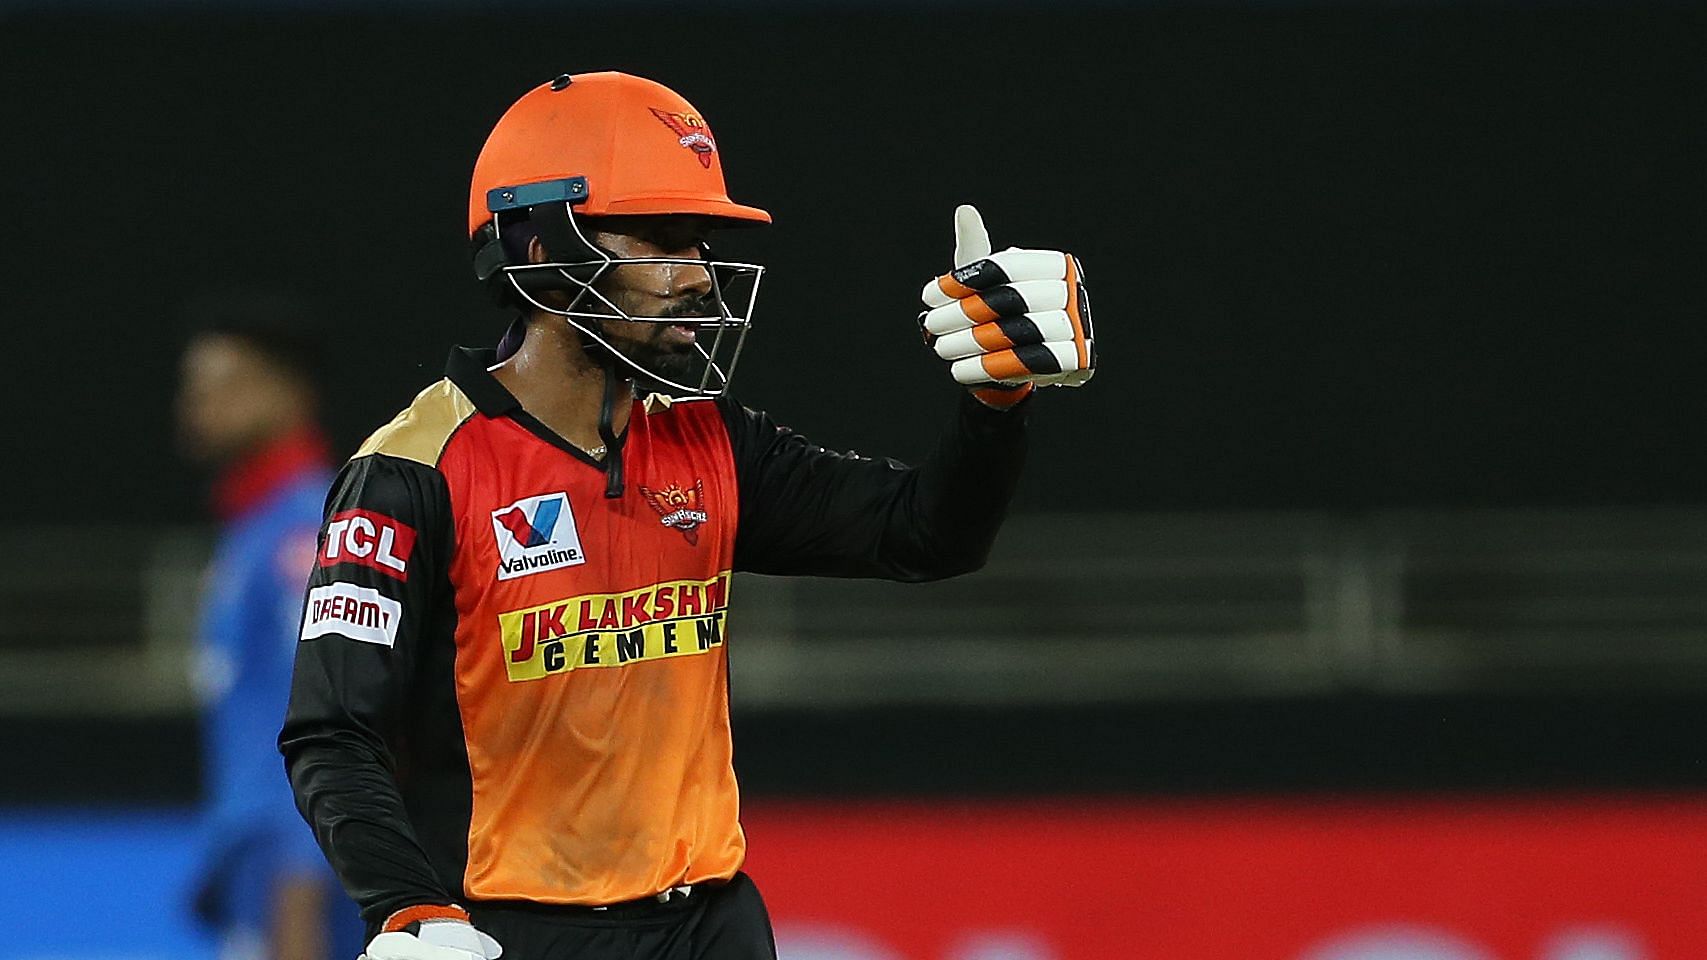 Wriddhiman Saha of the SunRisers Hyderabad. Image used for representation only.